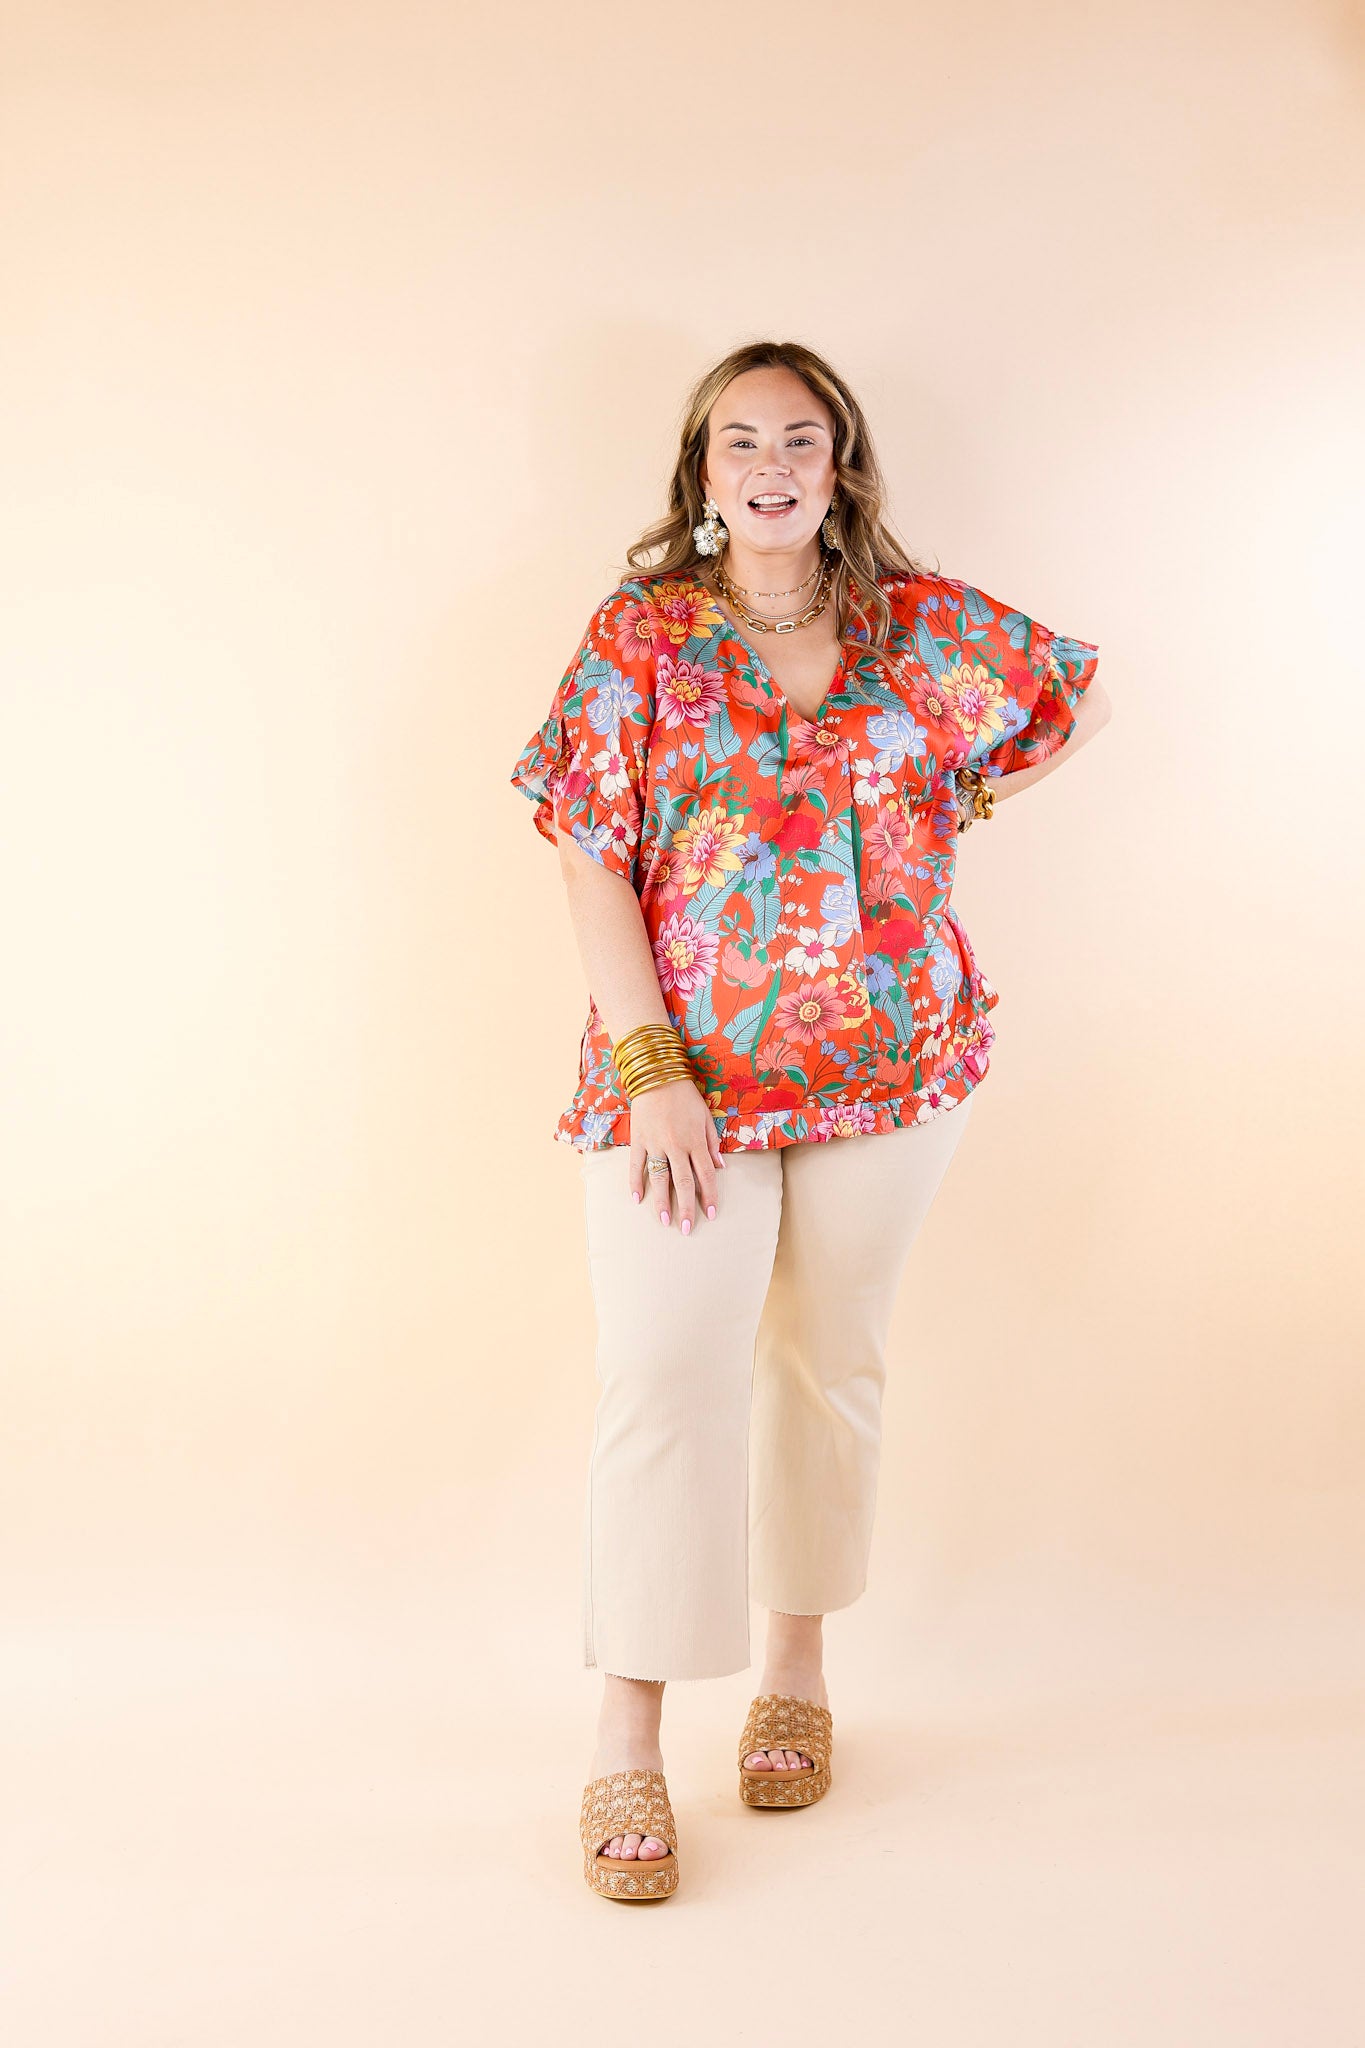 Blissful Mindset Floral V Neck Top with Short Ruffle Sleeves in Orange - Giddy Up Glamour Boutique